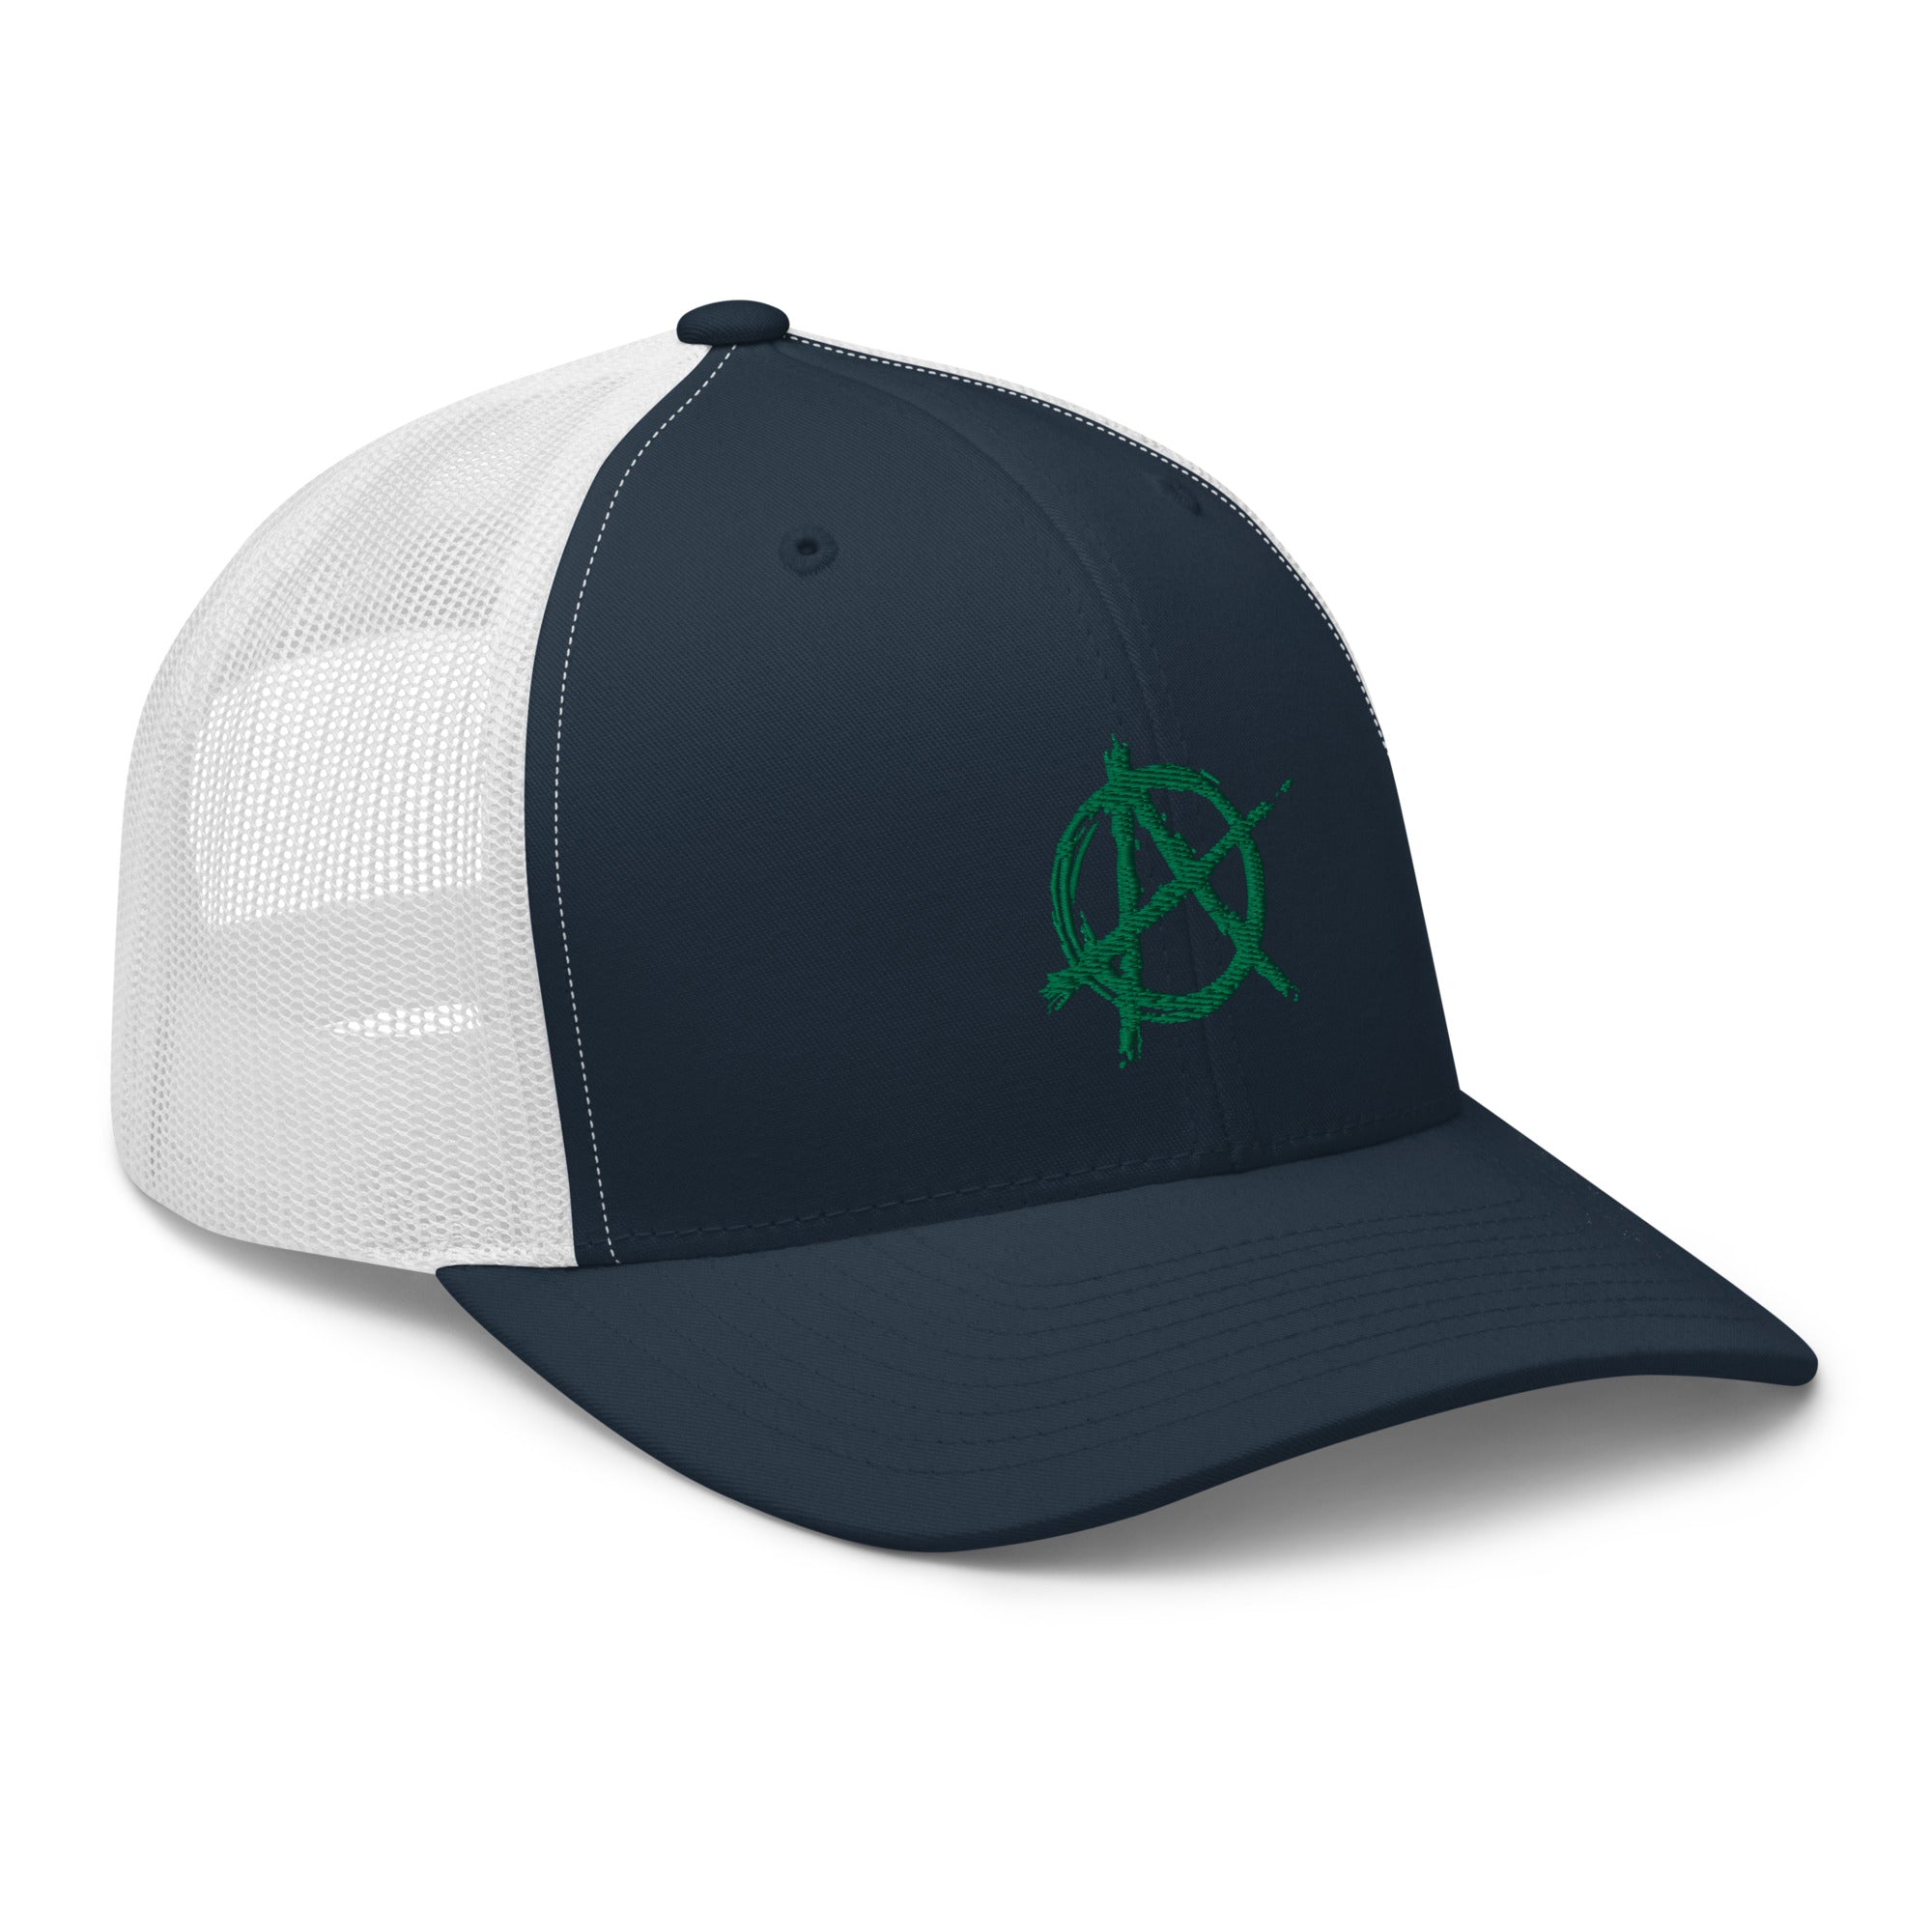 Green Anarchy Sign Punk Rock Chaos Embroidered Retro Trucker Cap Snapback Hat